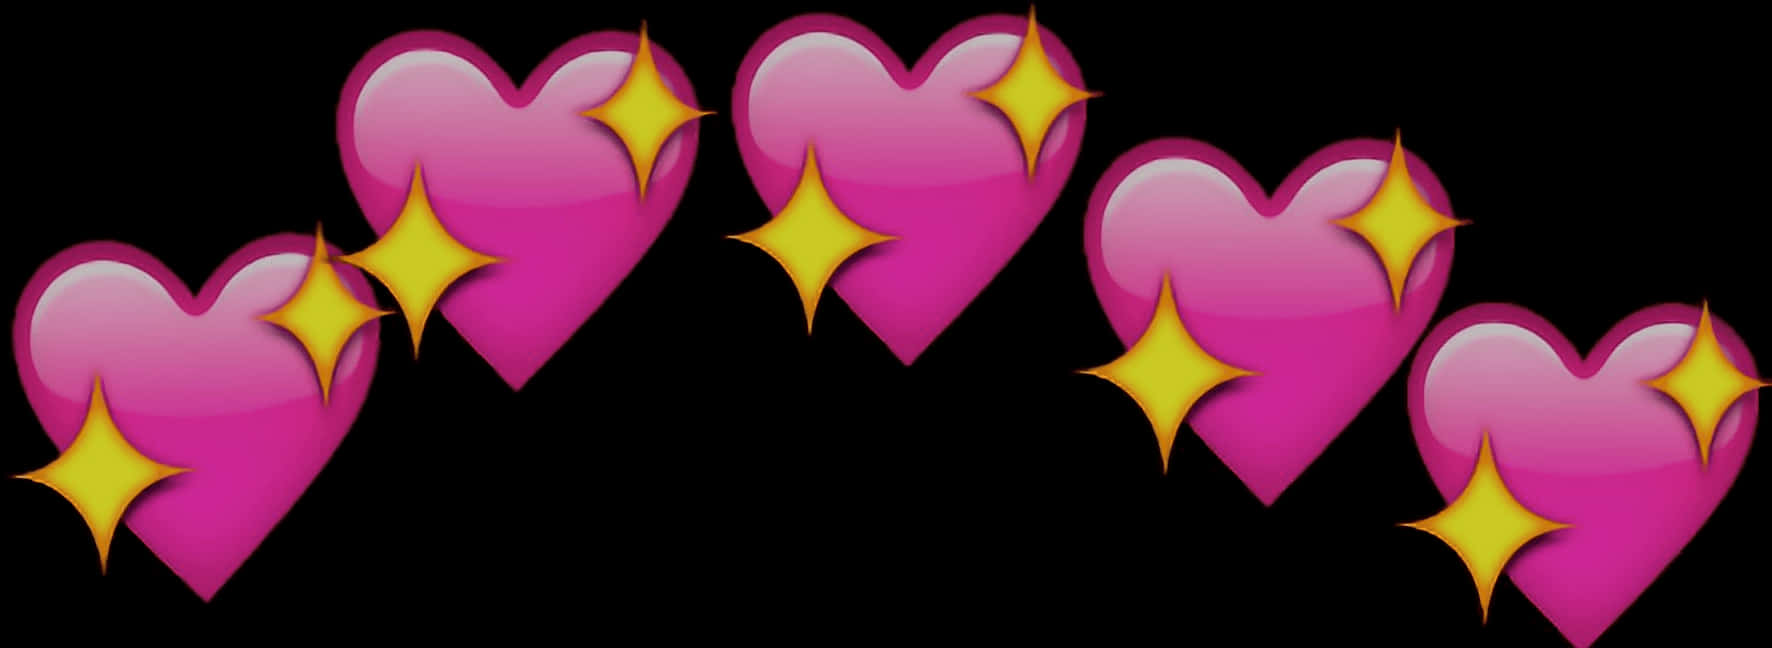 A Group Of Pink Hearts With Yellow Stars